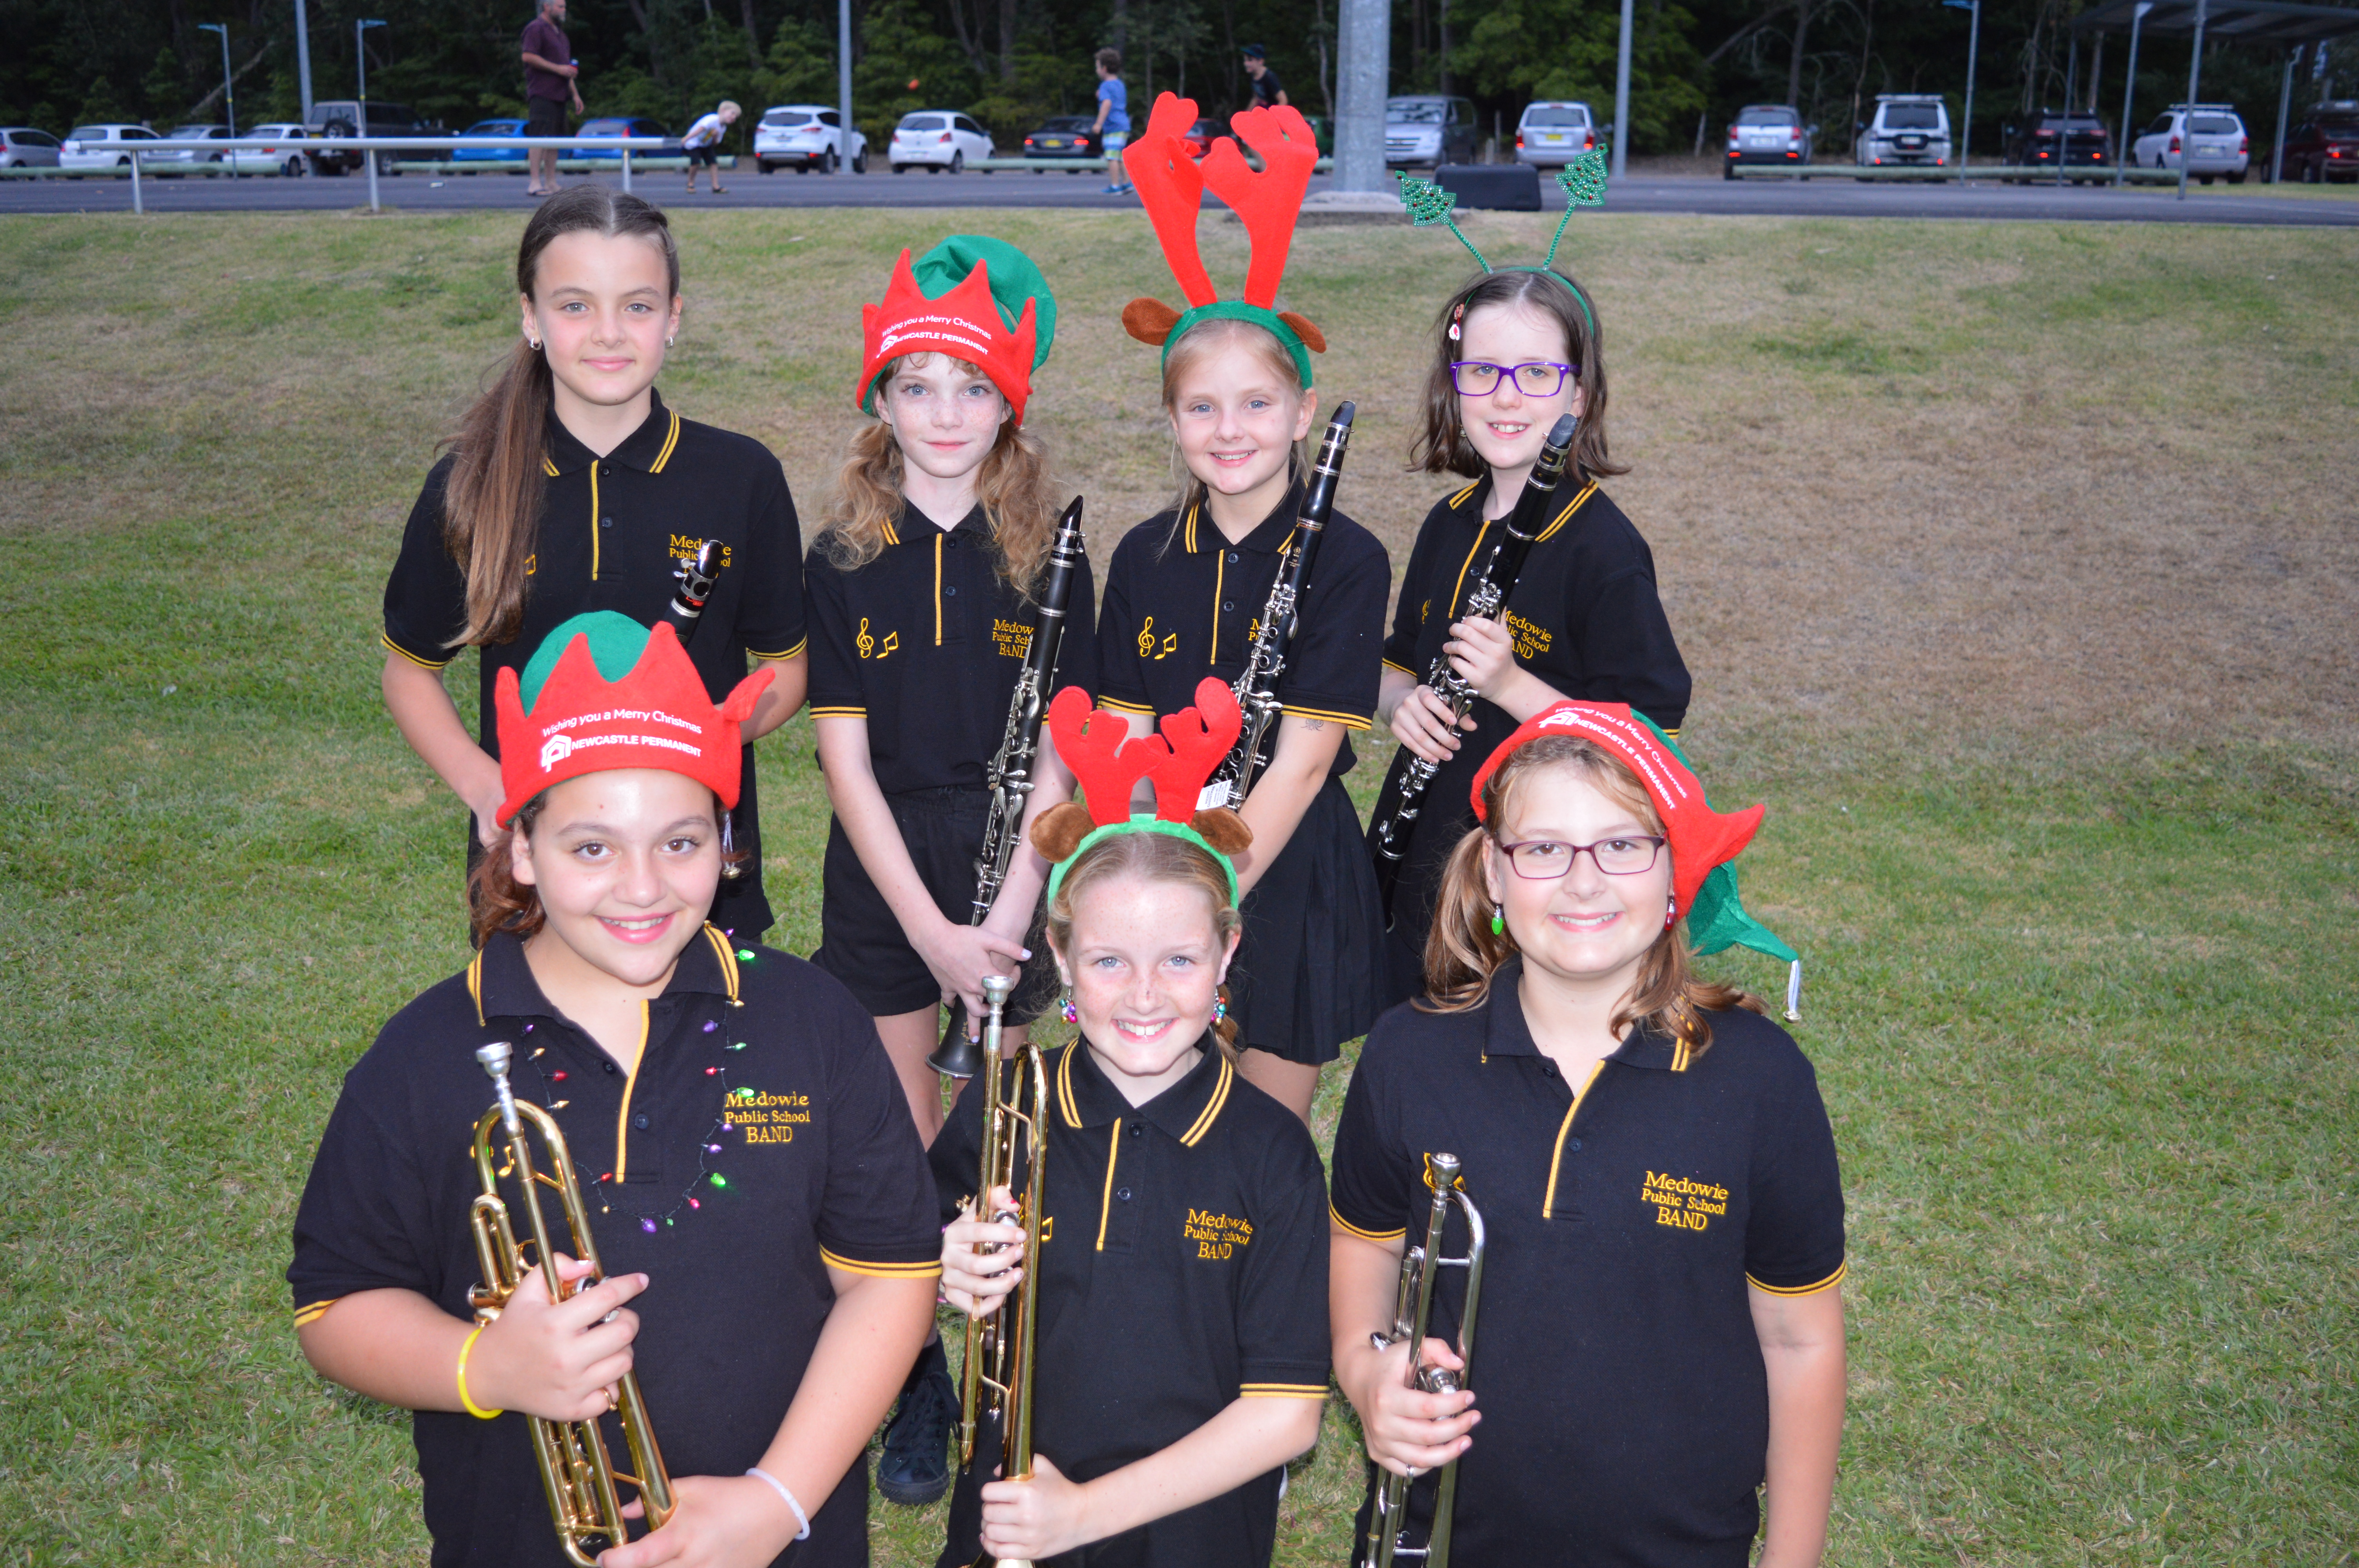 : [same as photo 3 but on a different angle]: Medowie Public School band members getting ready to play Jingle Bells and Santa Rocks. Front row: Kiah Skaines, Keira Thoburn, Abby Keeley. Back row: Lily Thurlow, Emersyn Towers, Yasmin McGarry, Charlotte Merriman.